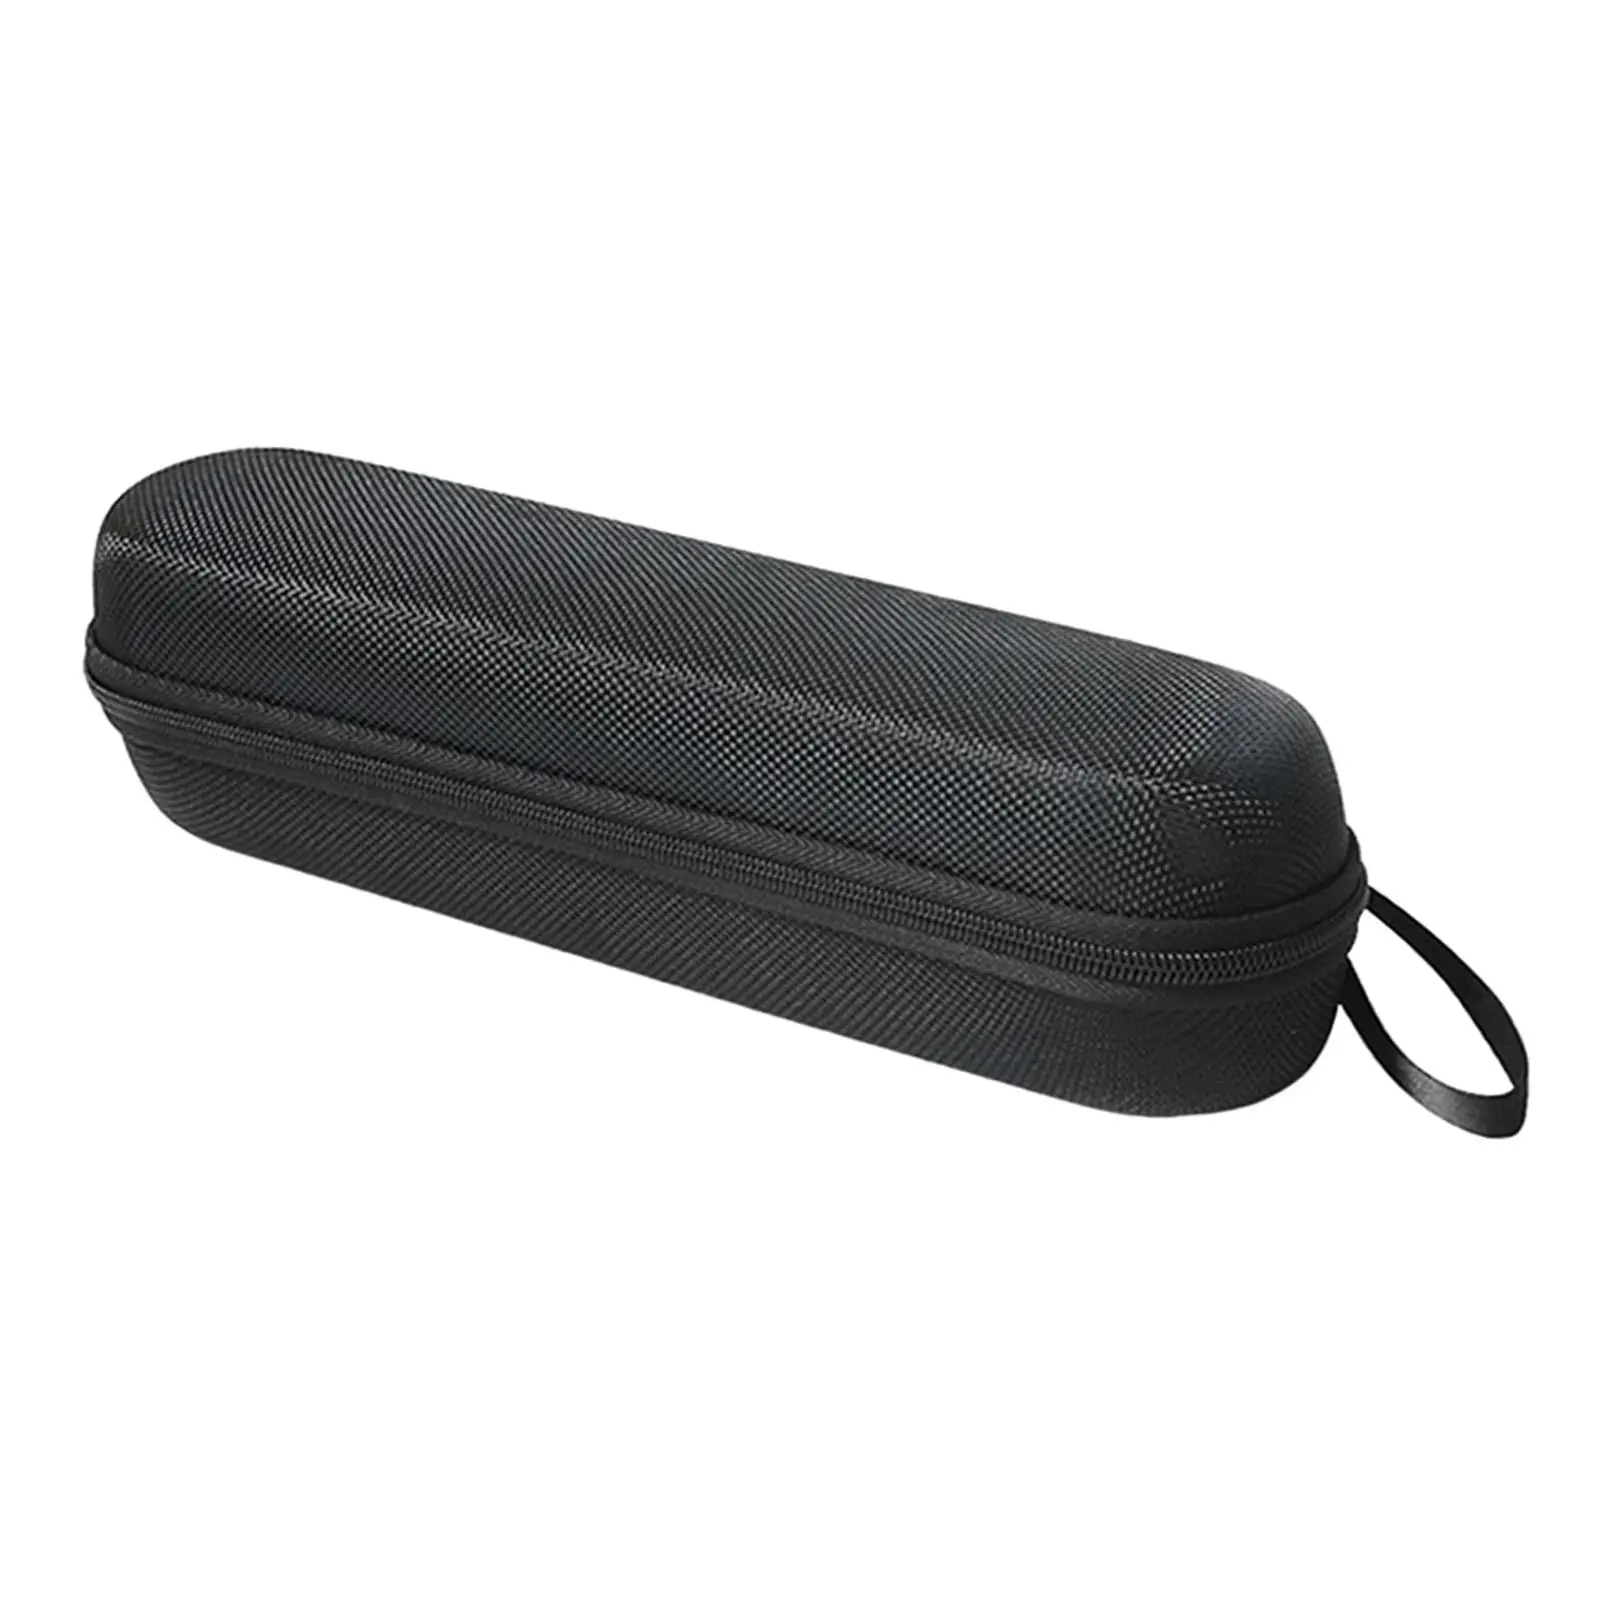 Toothbrush Travel Case Shockproof Portable Fits Most Electric Toothbrush Convenient Dustproof 278x70x70mm Toothbrush Storage Bag